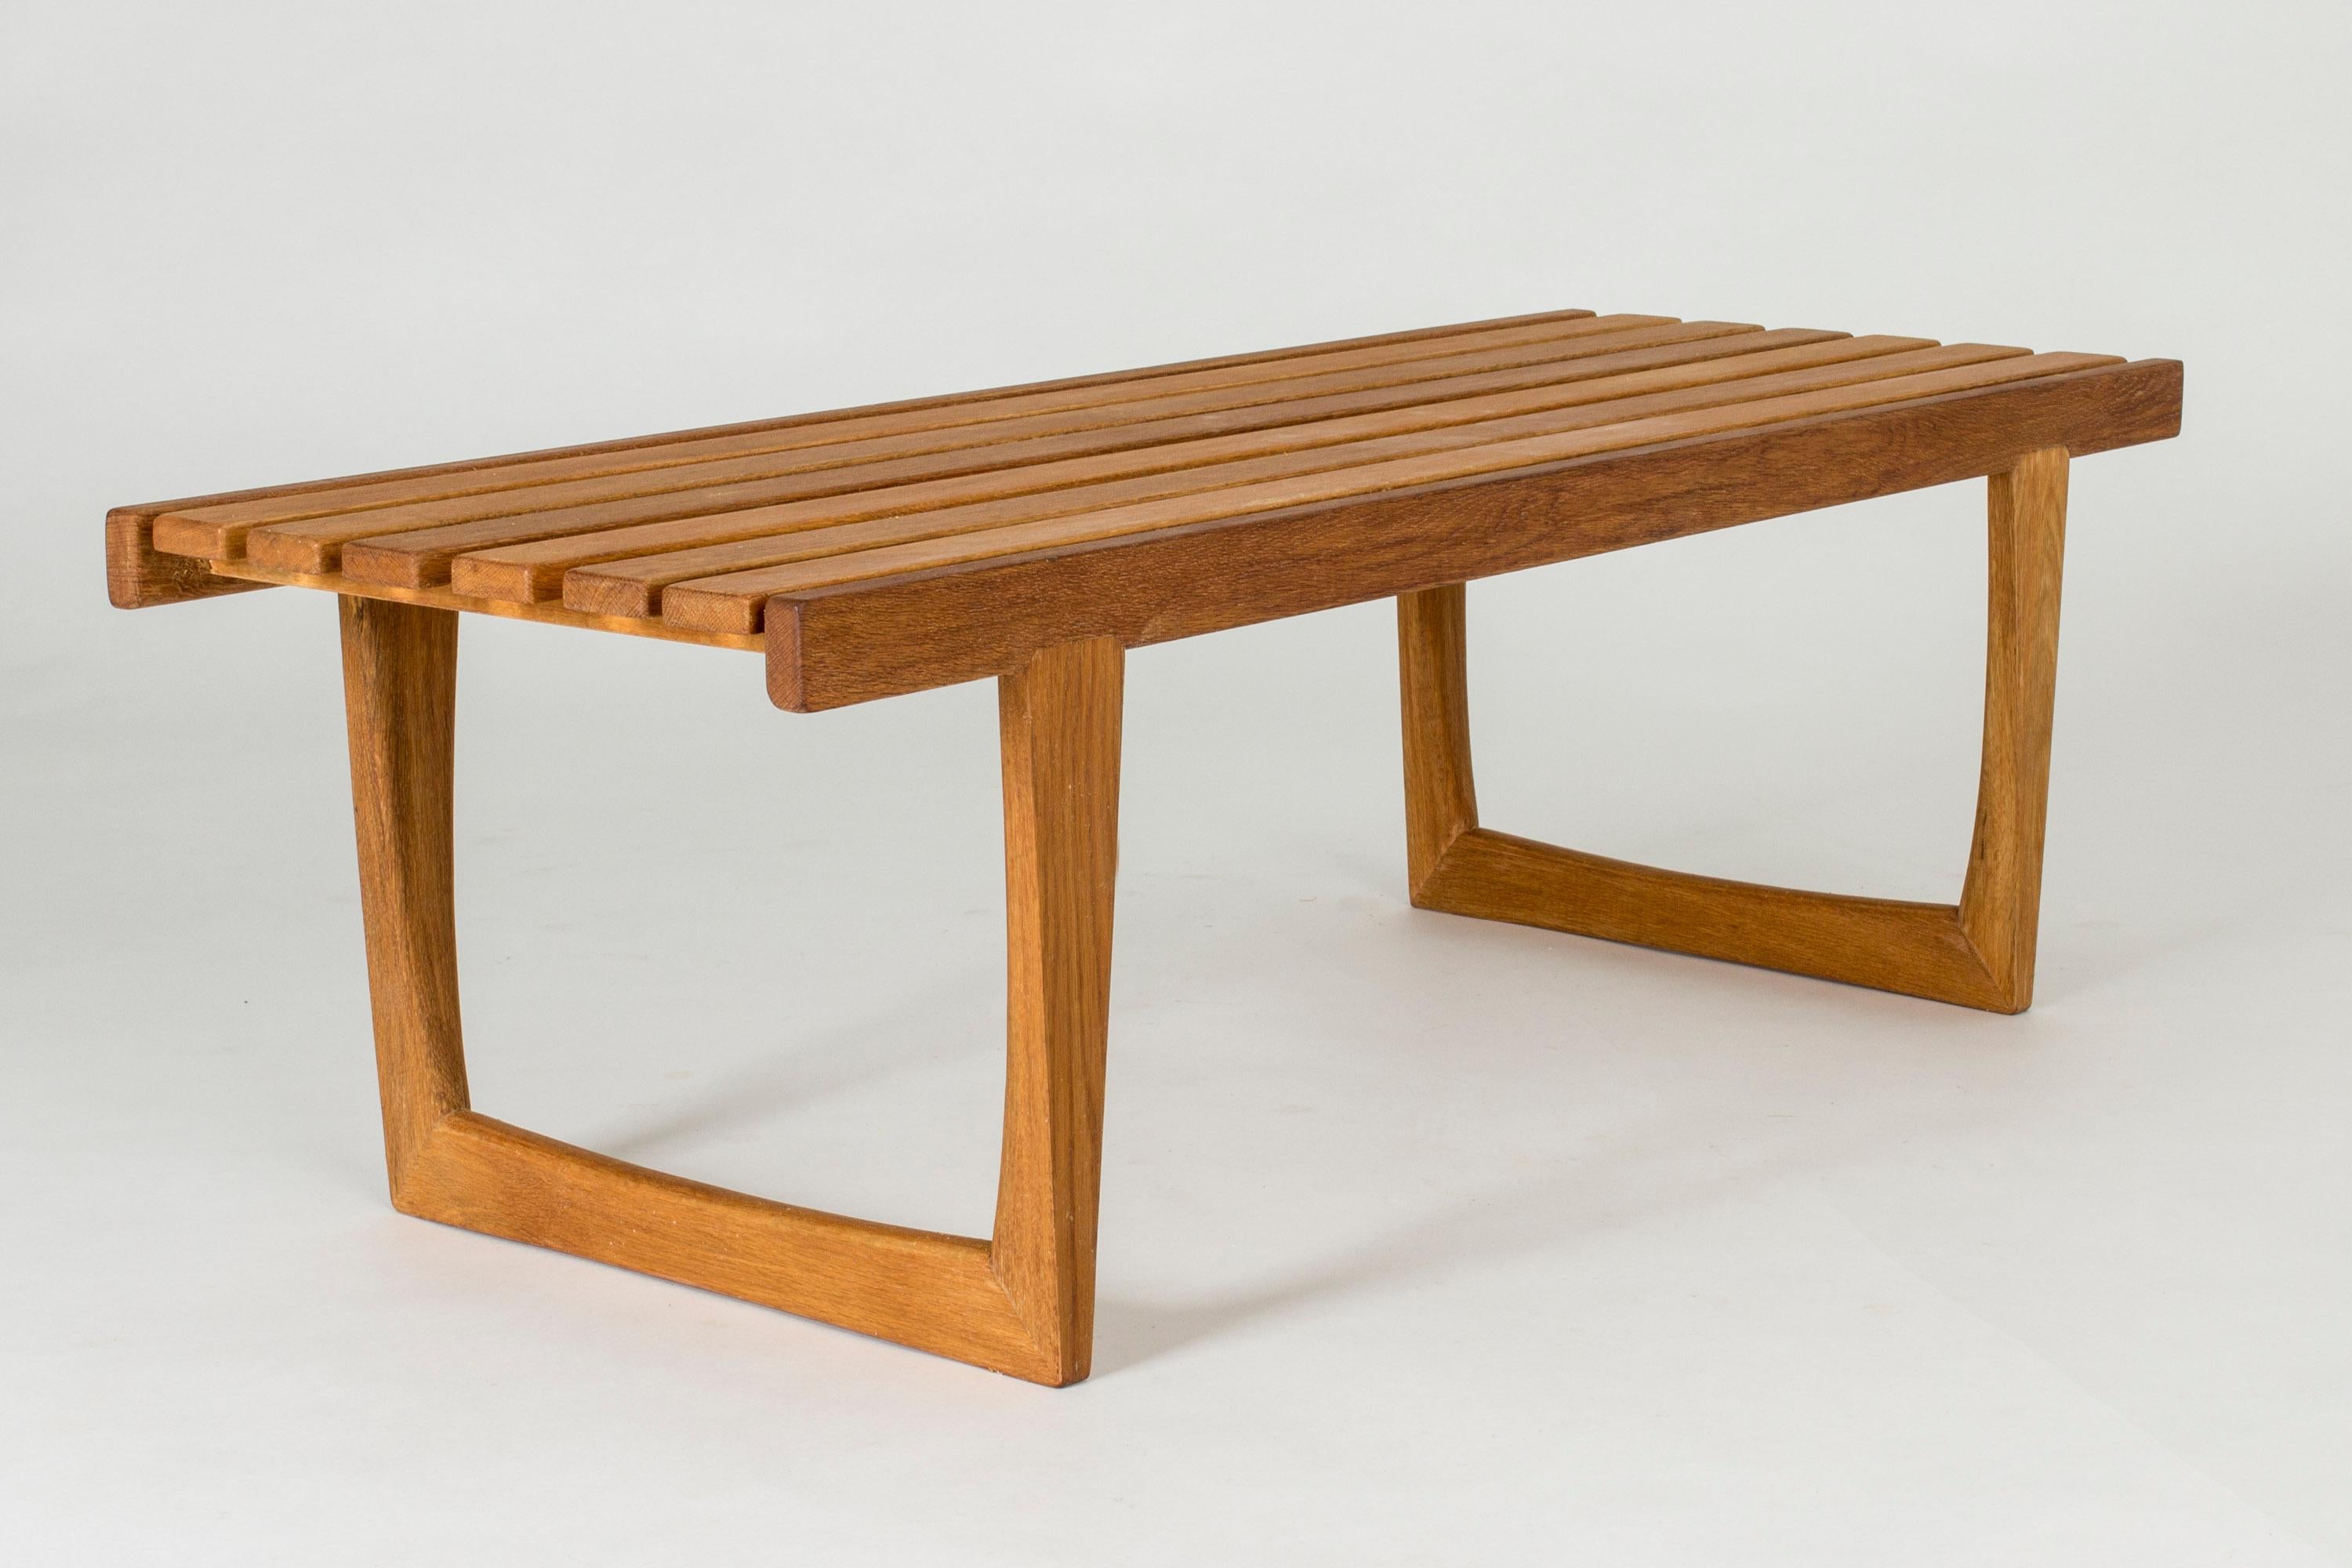 Sleek “Tokyo” bench by Yngvar Sandström, made for NK:s “Triva” series. Made from oil treated oak with great details and execution.